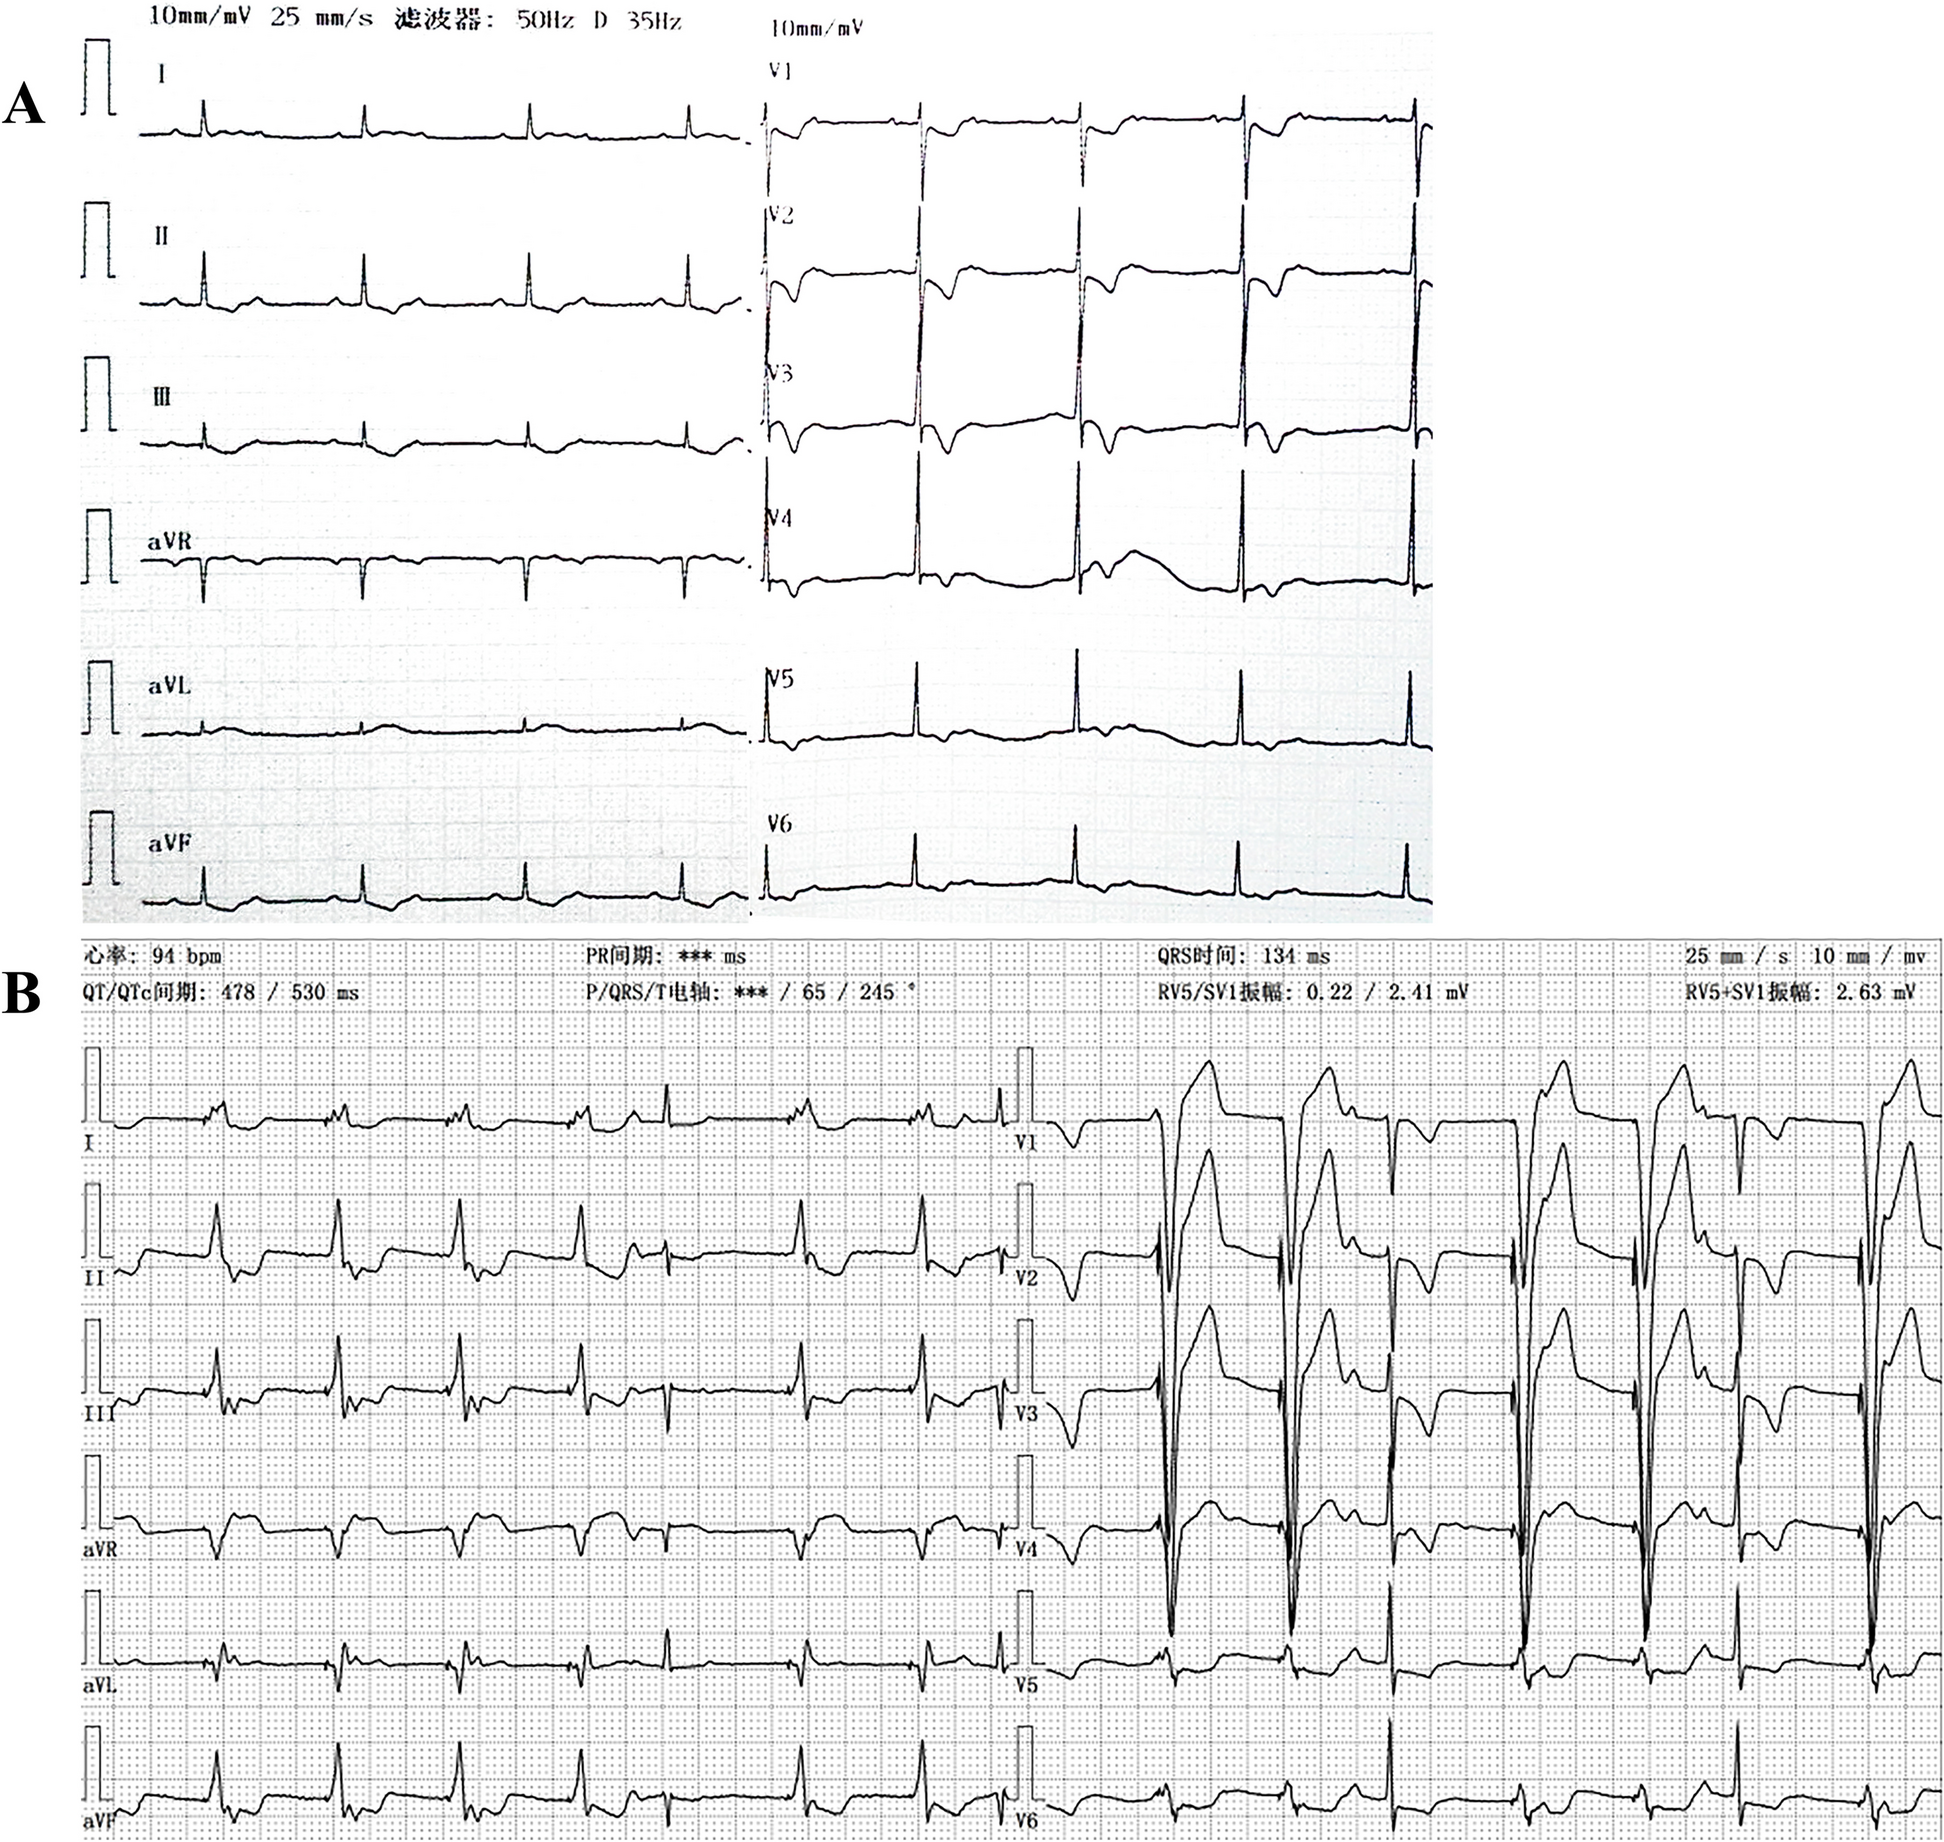 Transvenous endocardial pacing with SelectSecure™ 3830 lead in pediatric patients: case series of two infants and a literature review